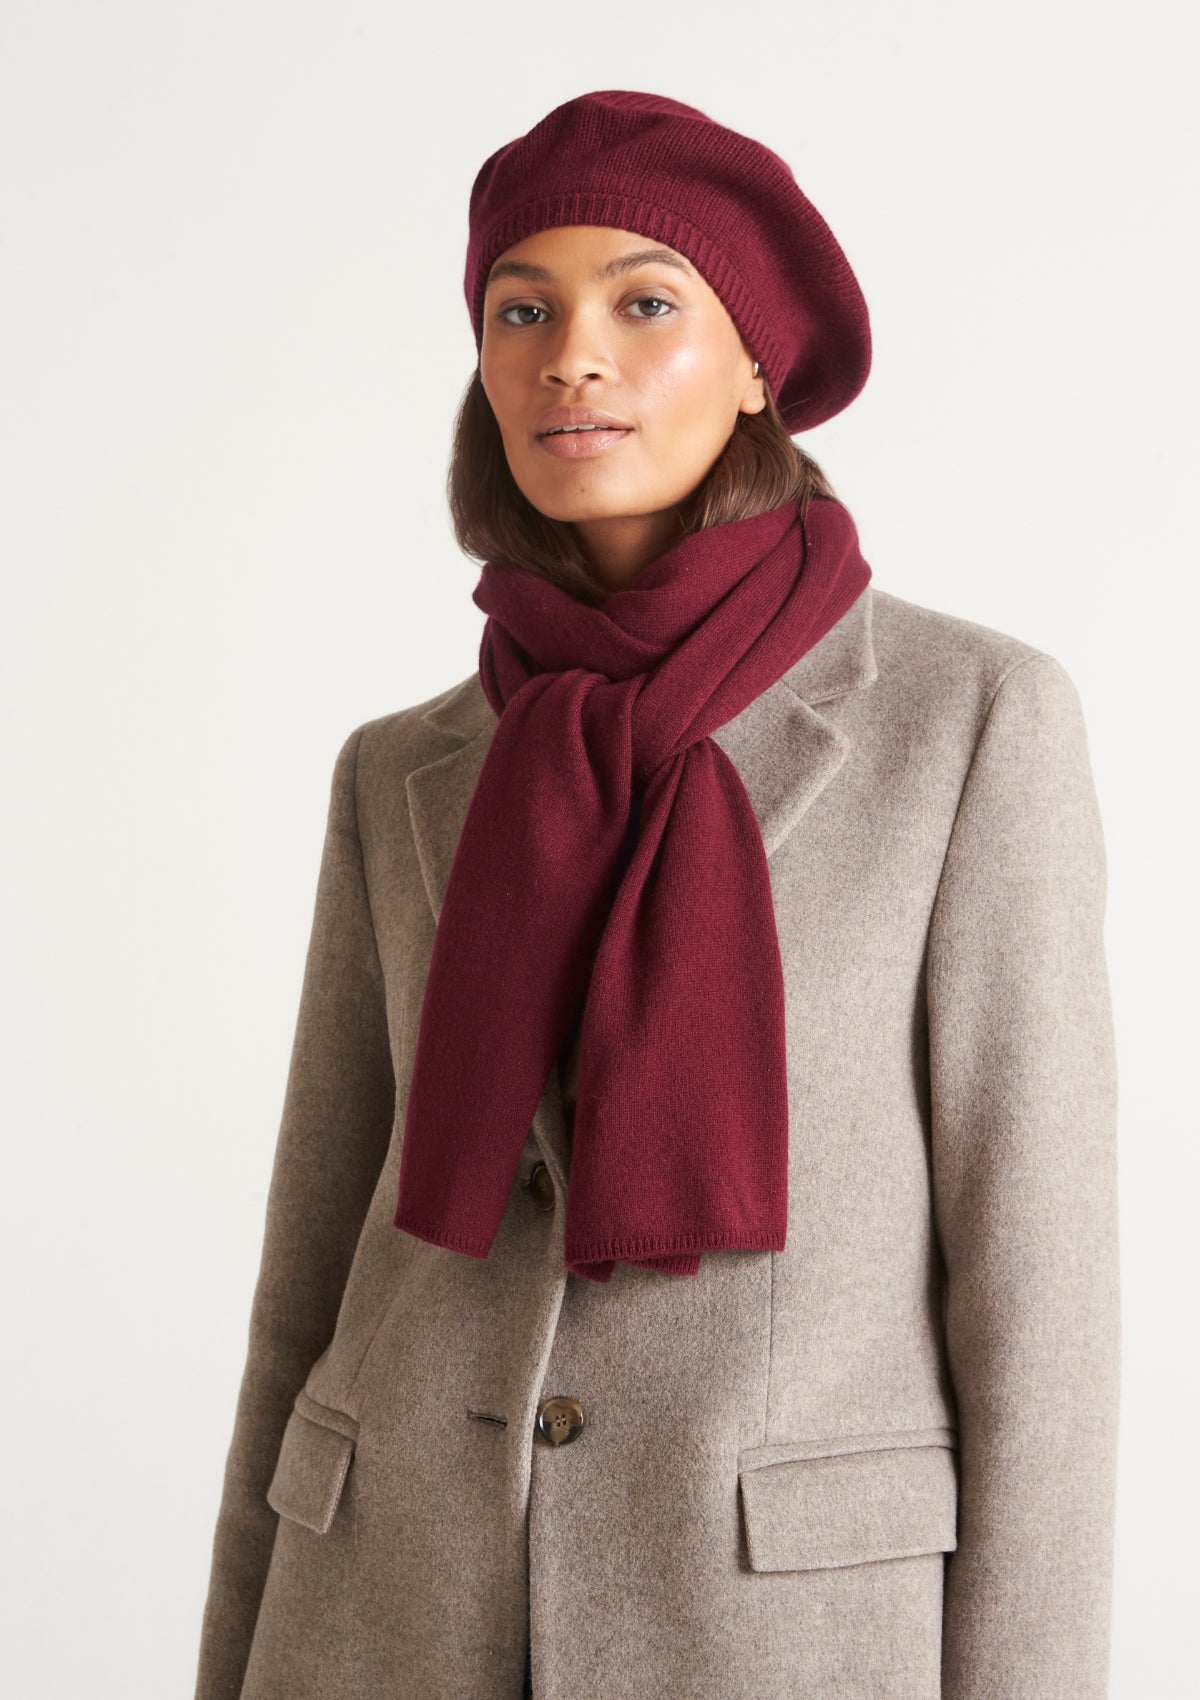 Cashmere Beret in Barolo Red